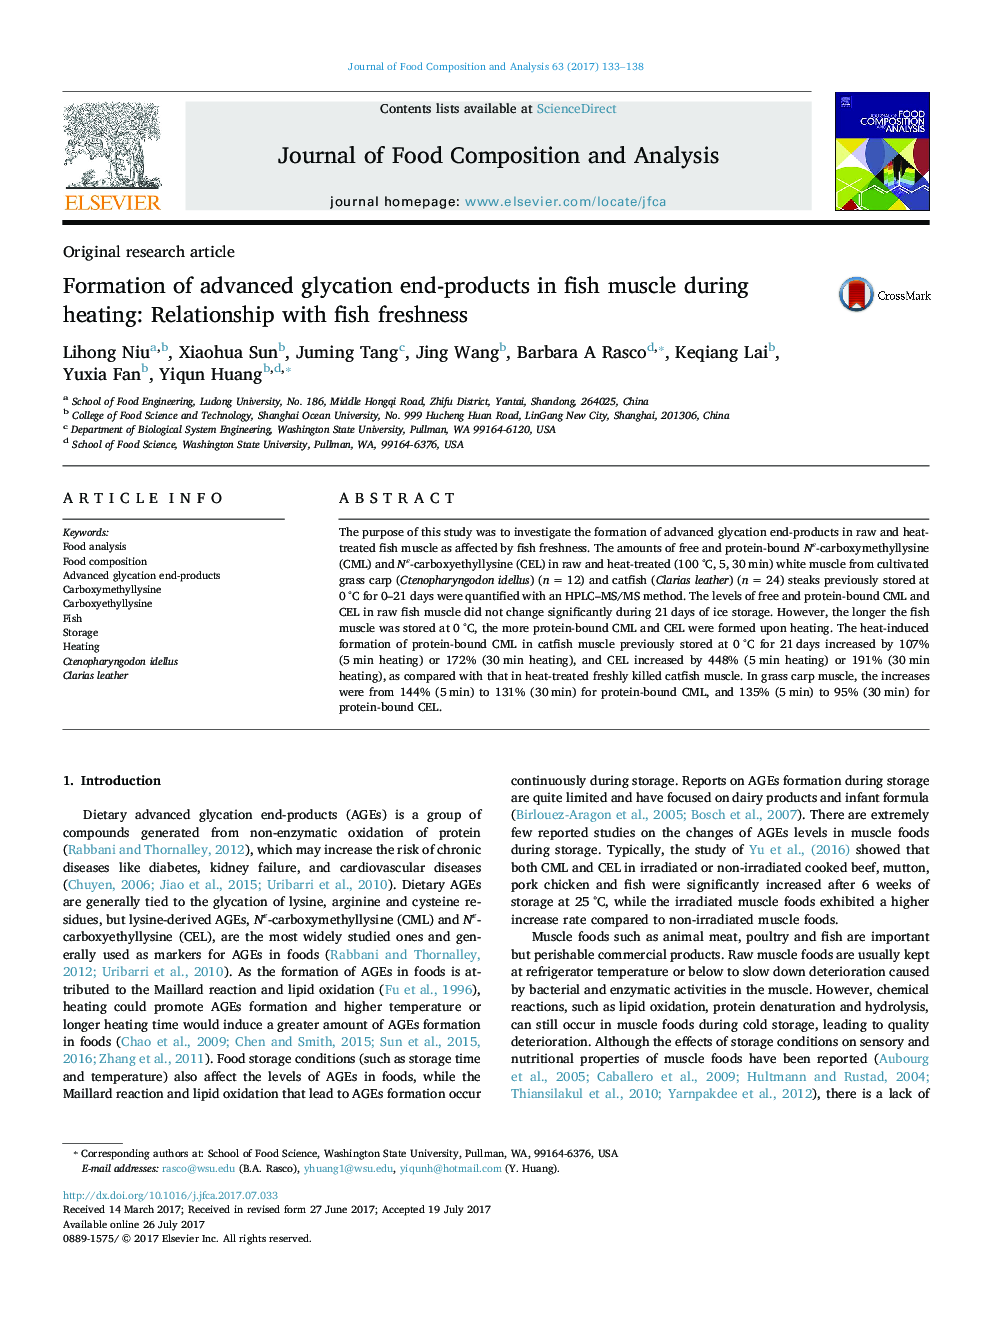 Original research articleFormation of advanced glycation end-products in fish muscle during heating: Relationship with fish freshness